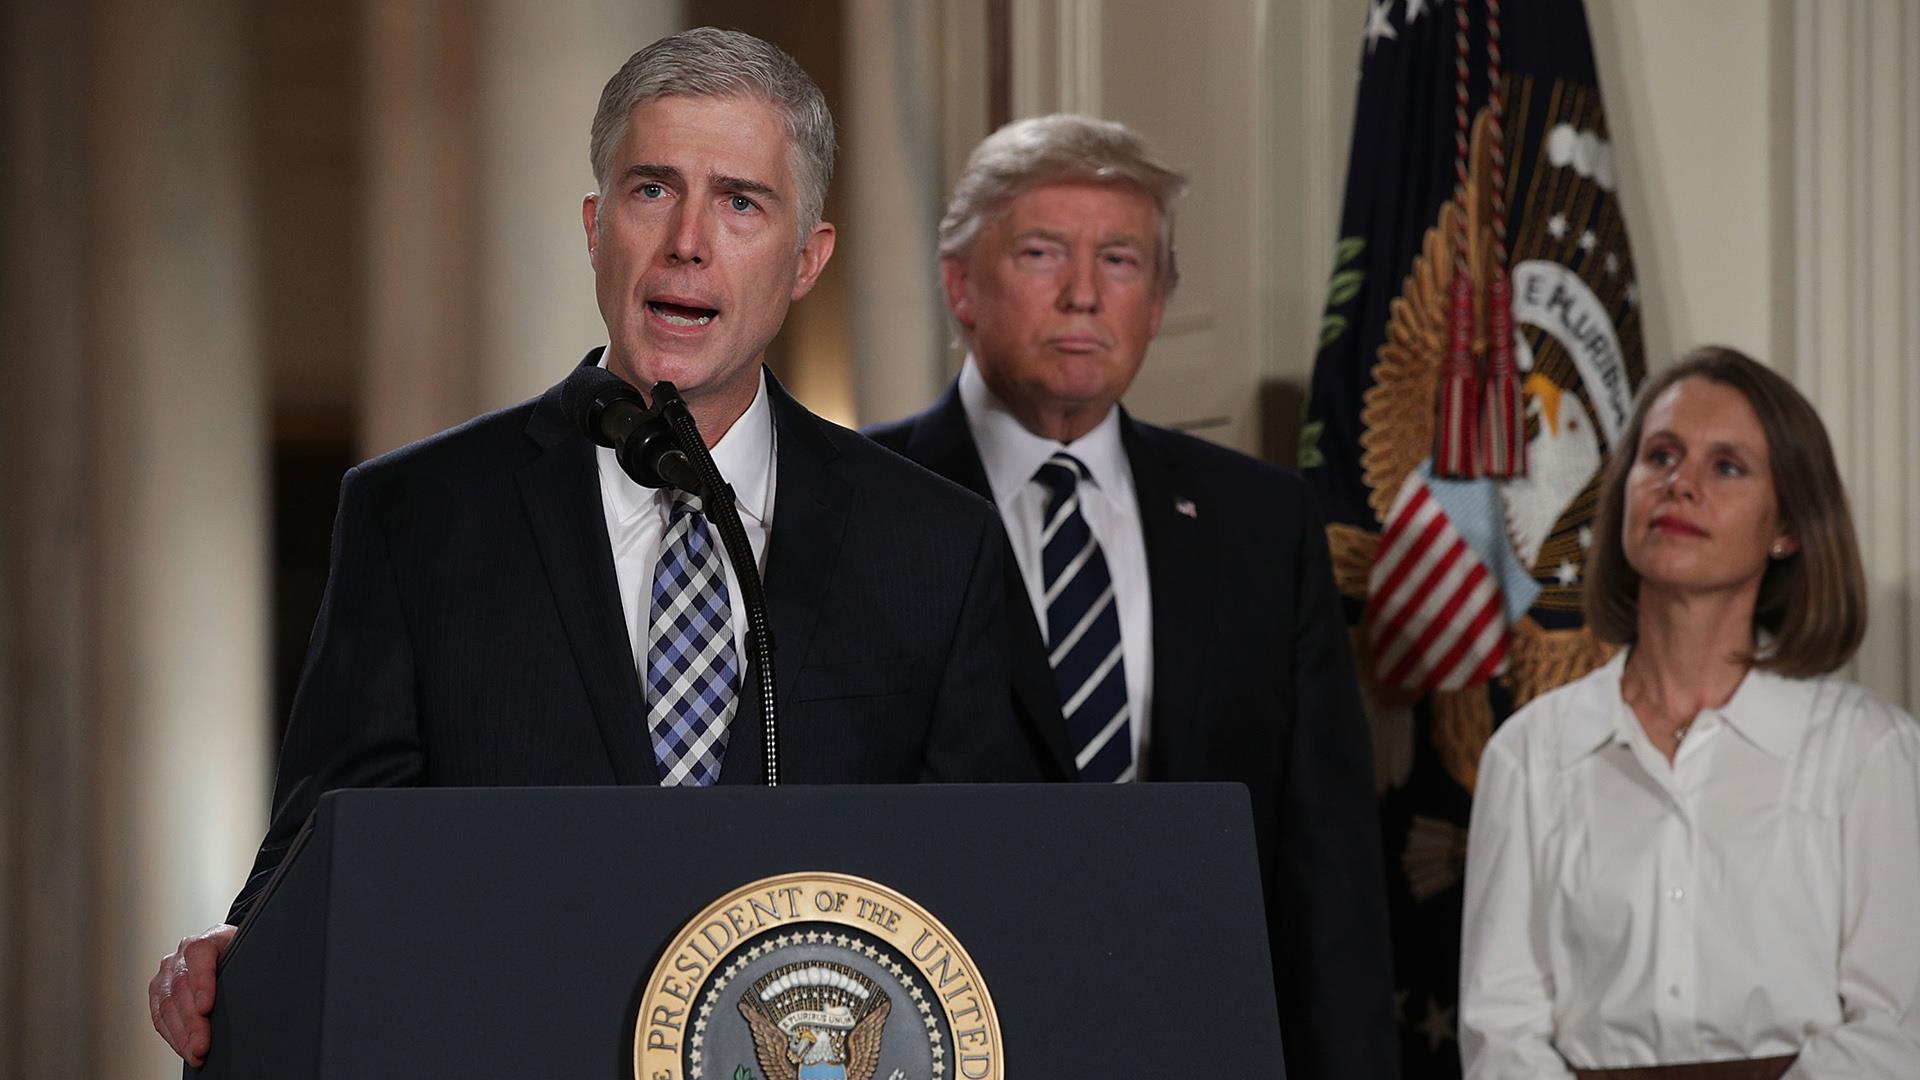 Neil Gorsuch 'approaches the law as Scalia did,' Pete Williams says